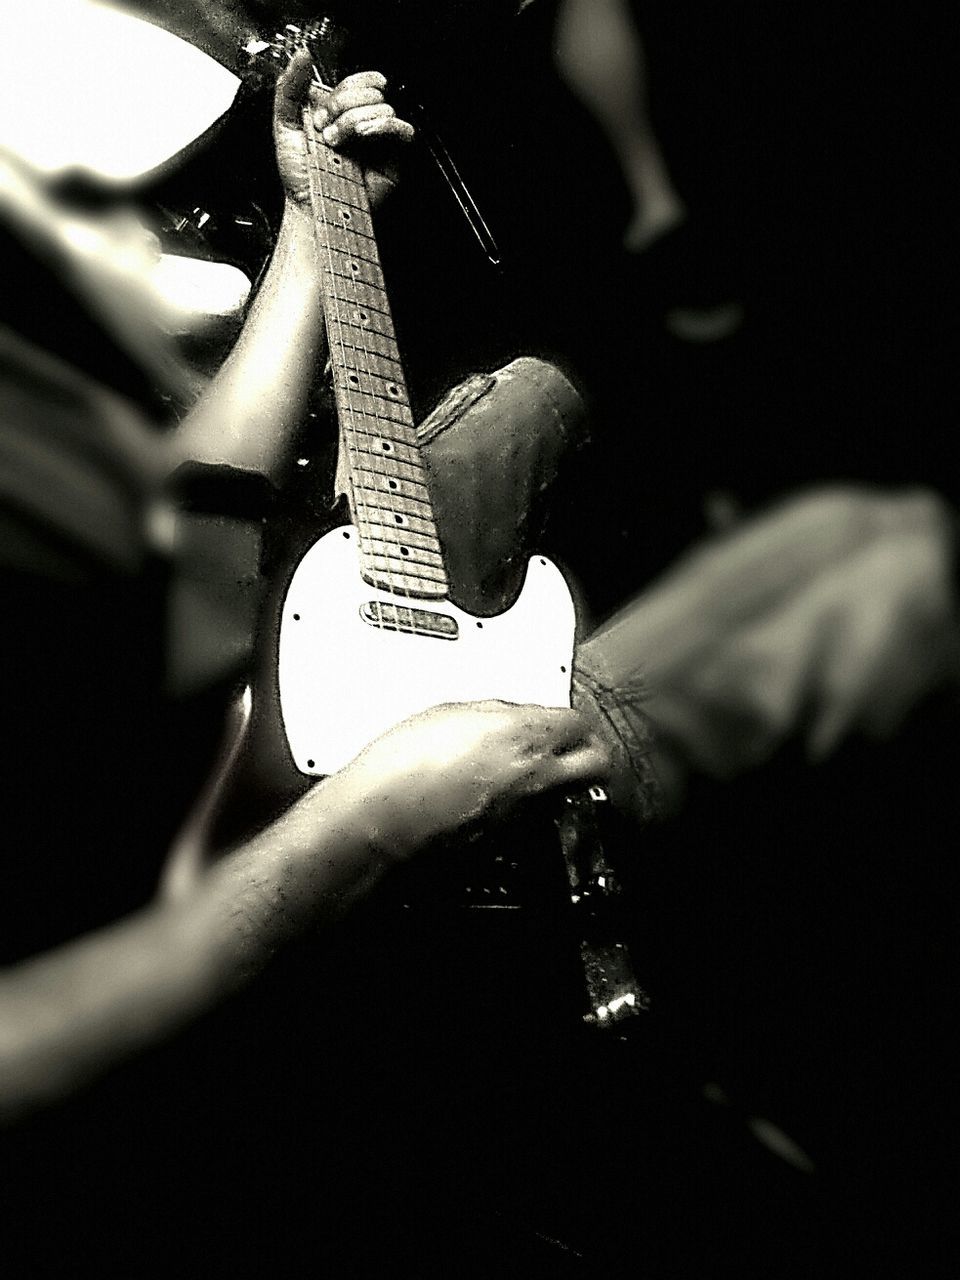 CROPPED IMAGE OF PERSON HOLDING GUITAR